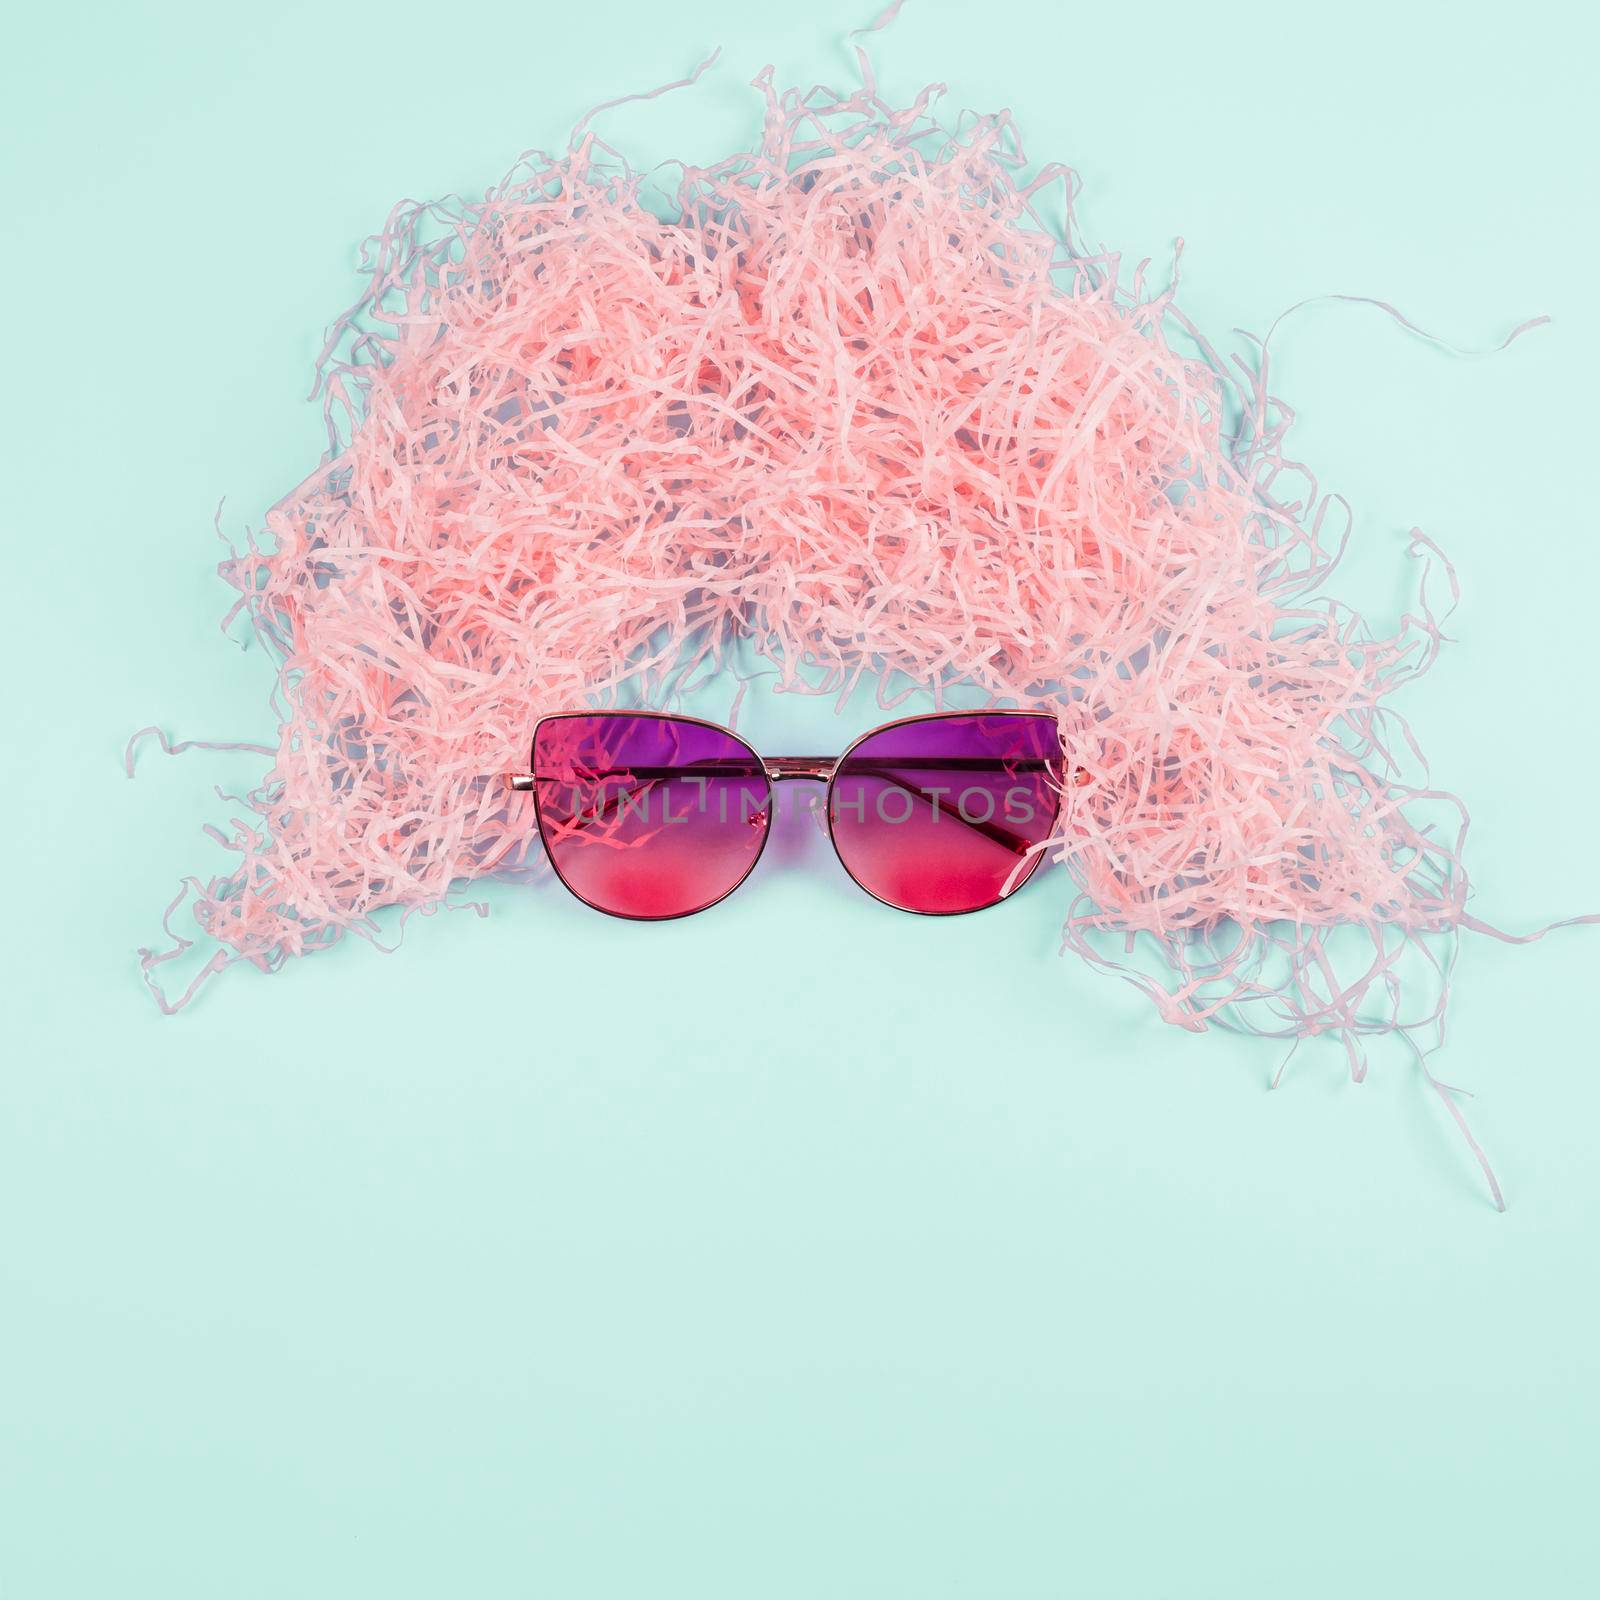 pink shredded paper wig sunglasses mint background. High quality photo by Zahard